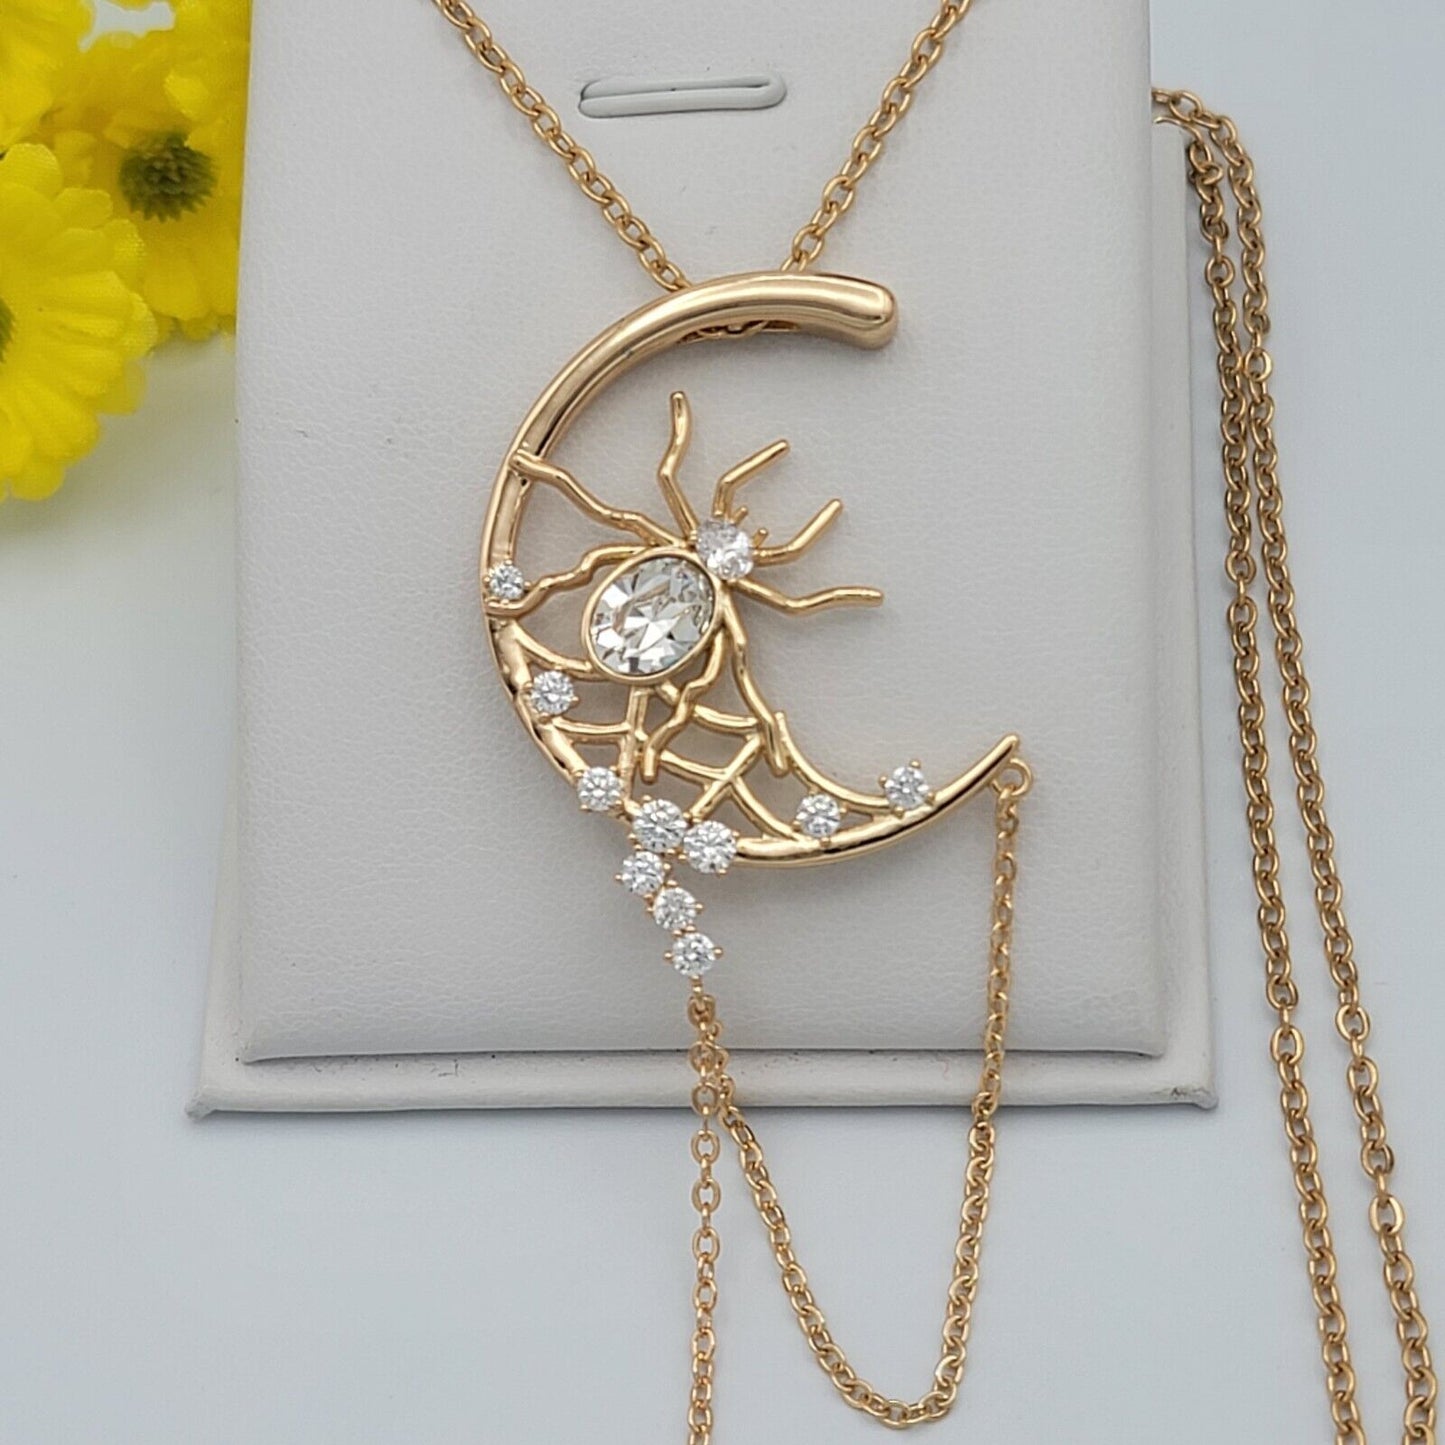 Necklaces - 18K Gold Plated. Spider Pendant & Chain.